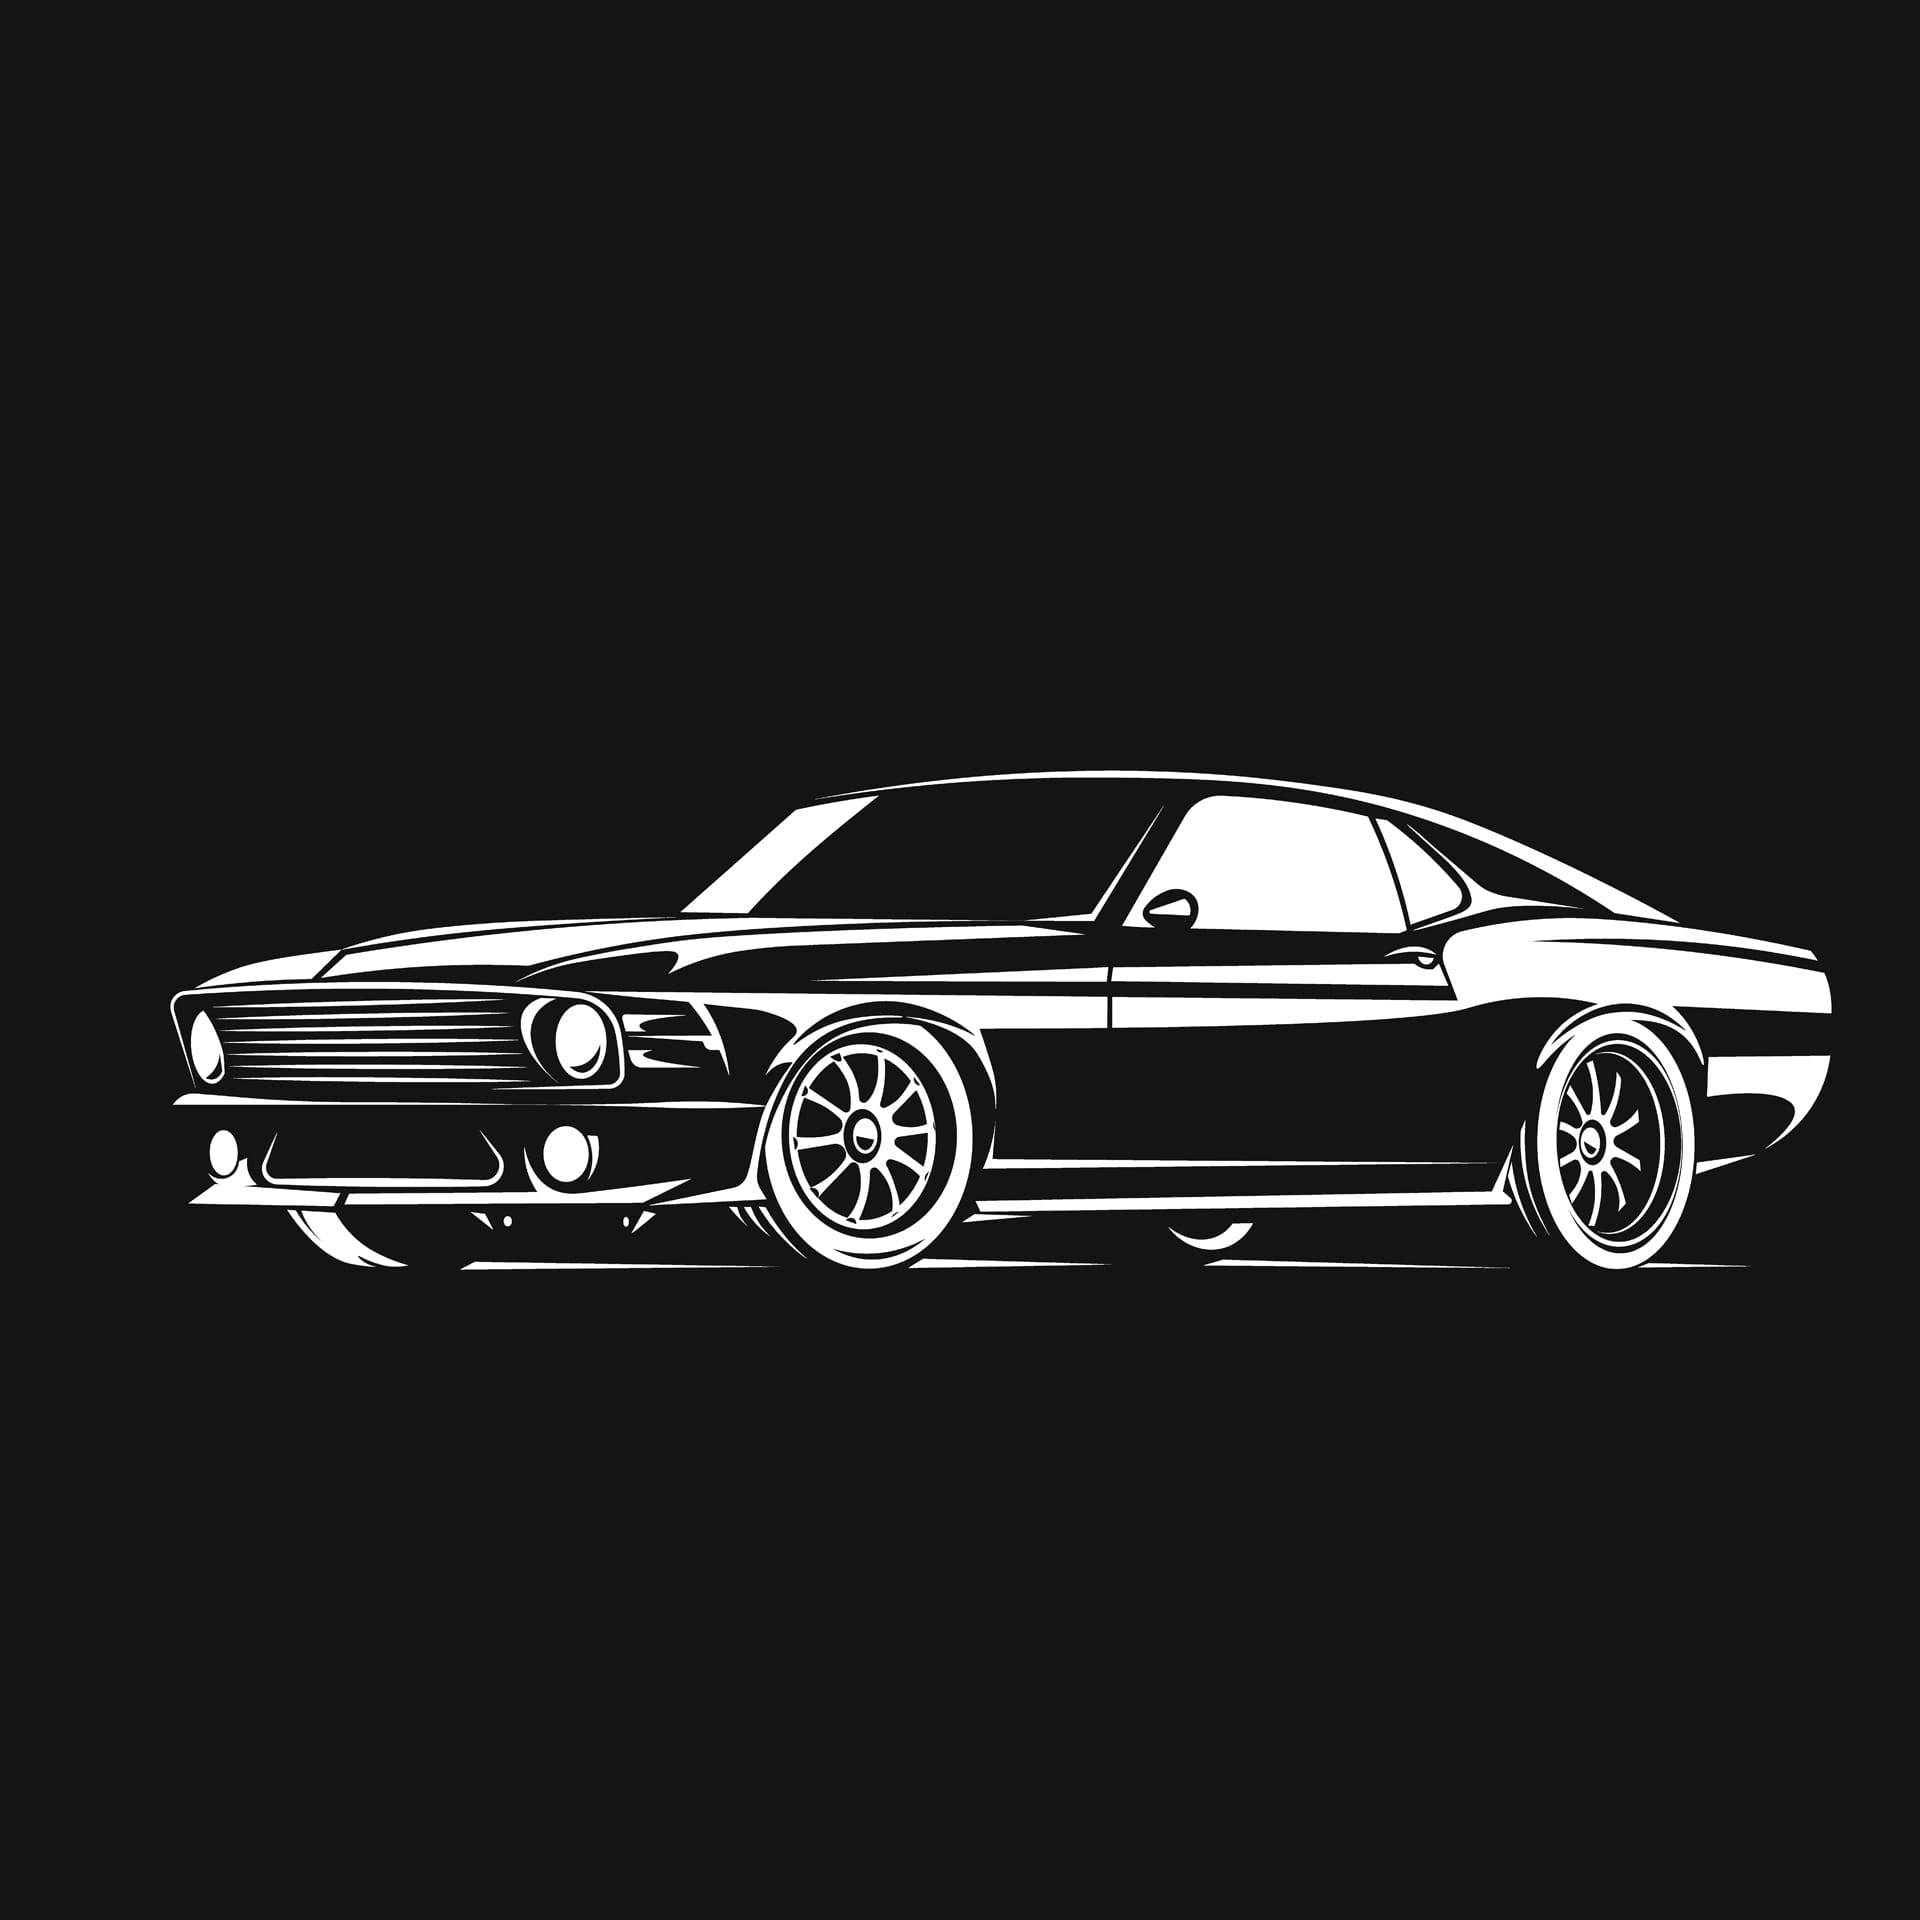 Muscle car white black background poster car profile picture